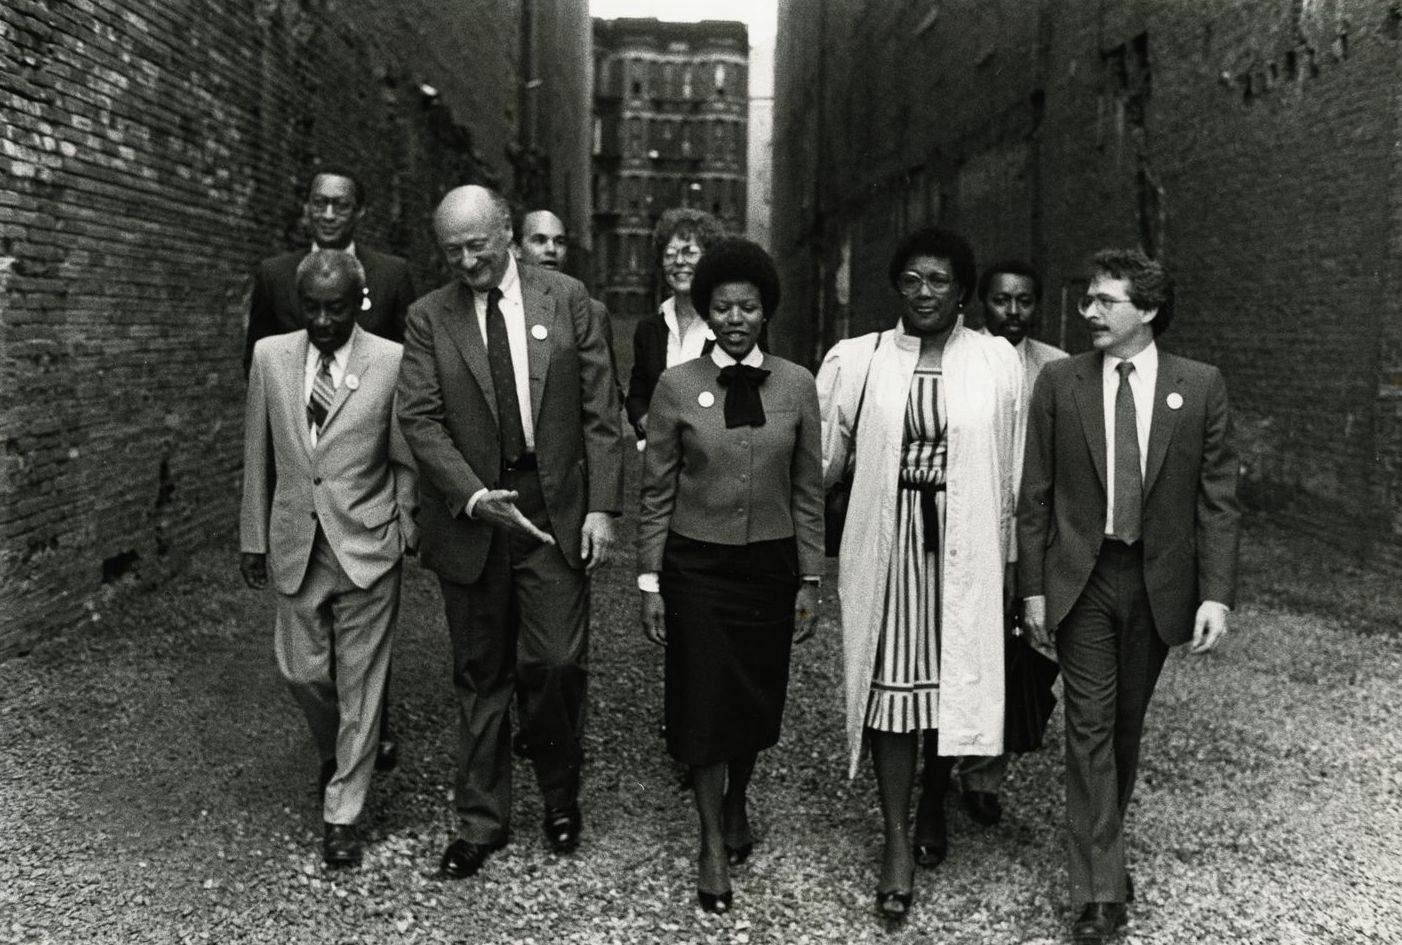 A black and white photo of a group of people dressed in business attire walking together between two buildings in New York City.